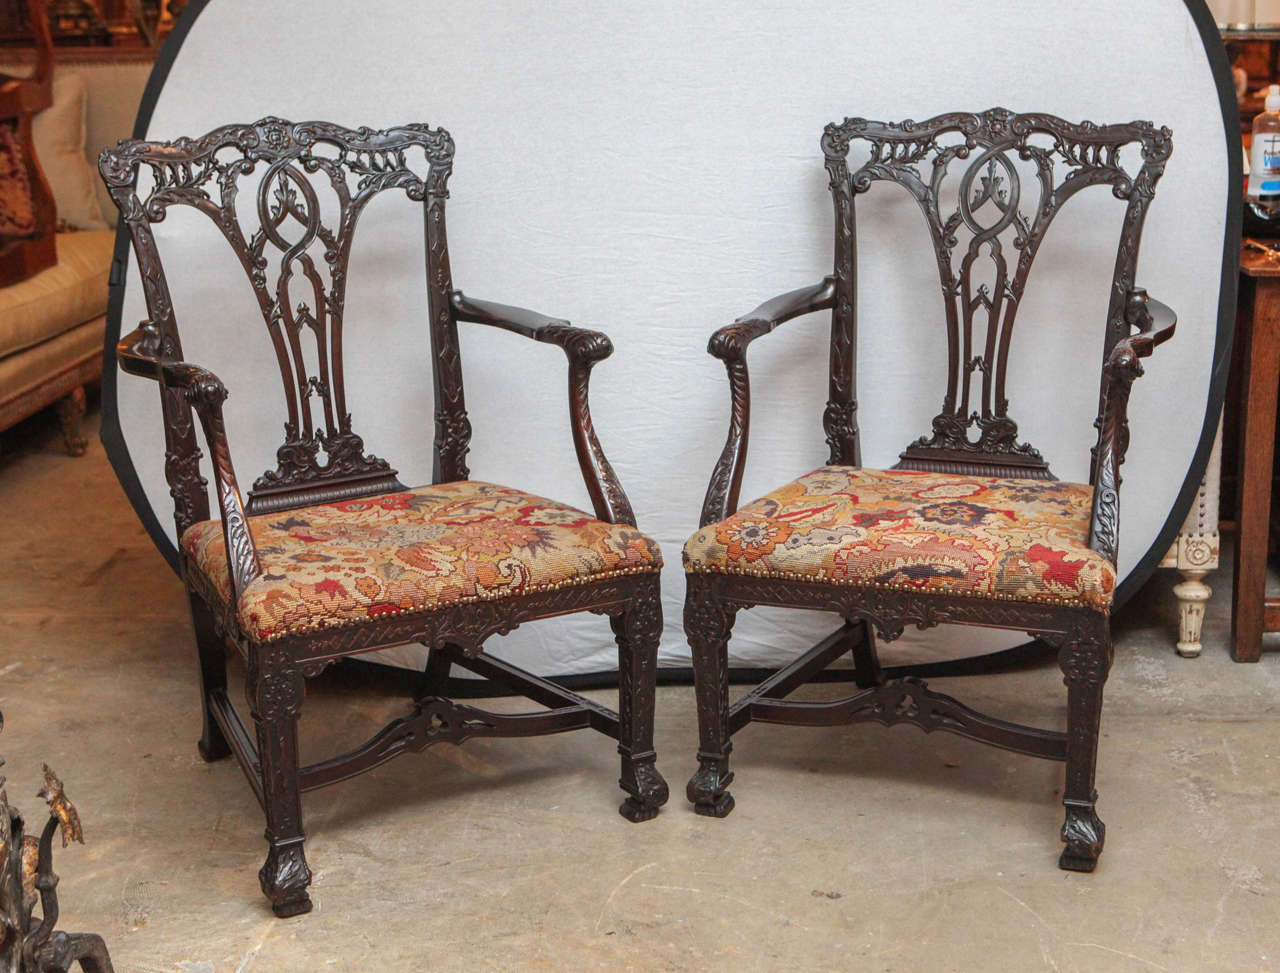 Pair of 19th century English very finely carved mahogany oversized open armchairs with original needlepoint seats.